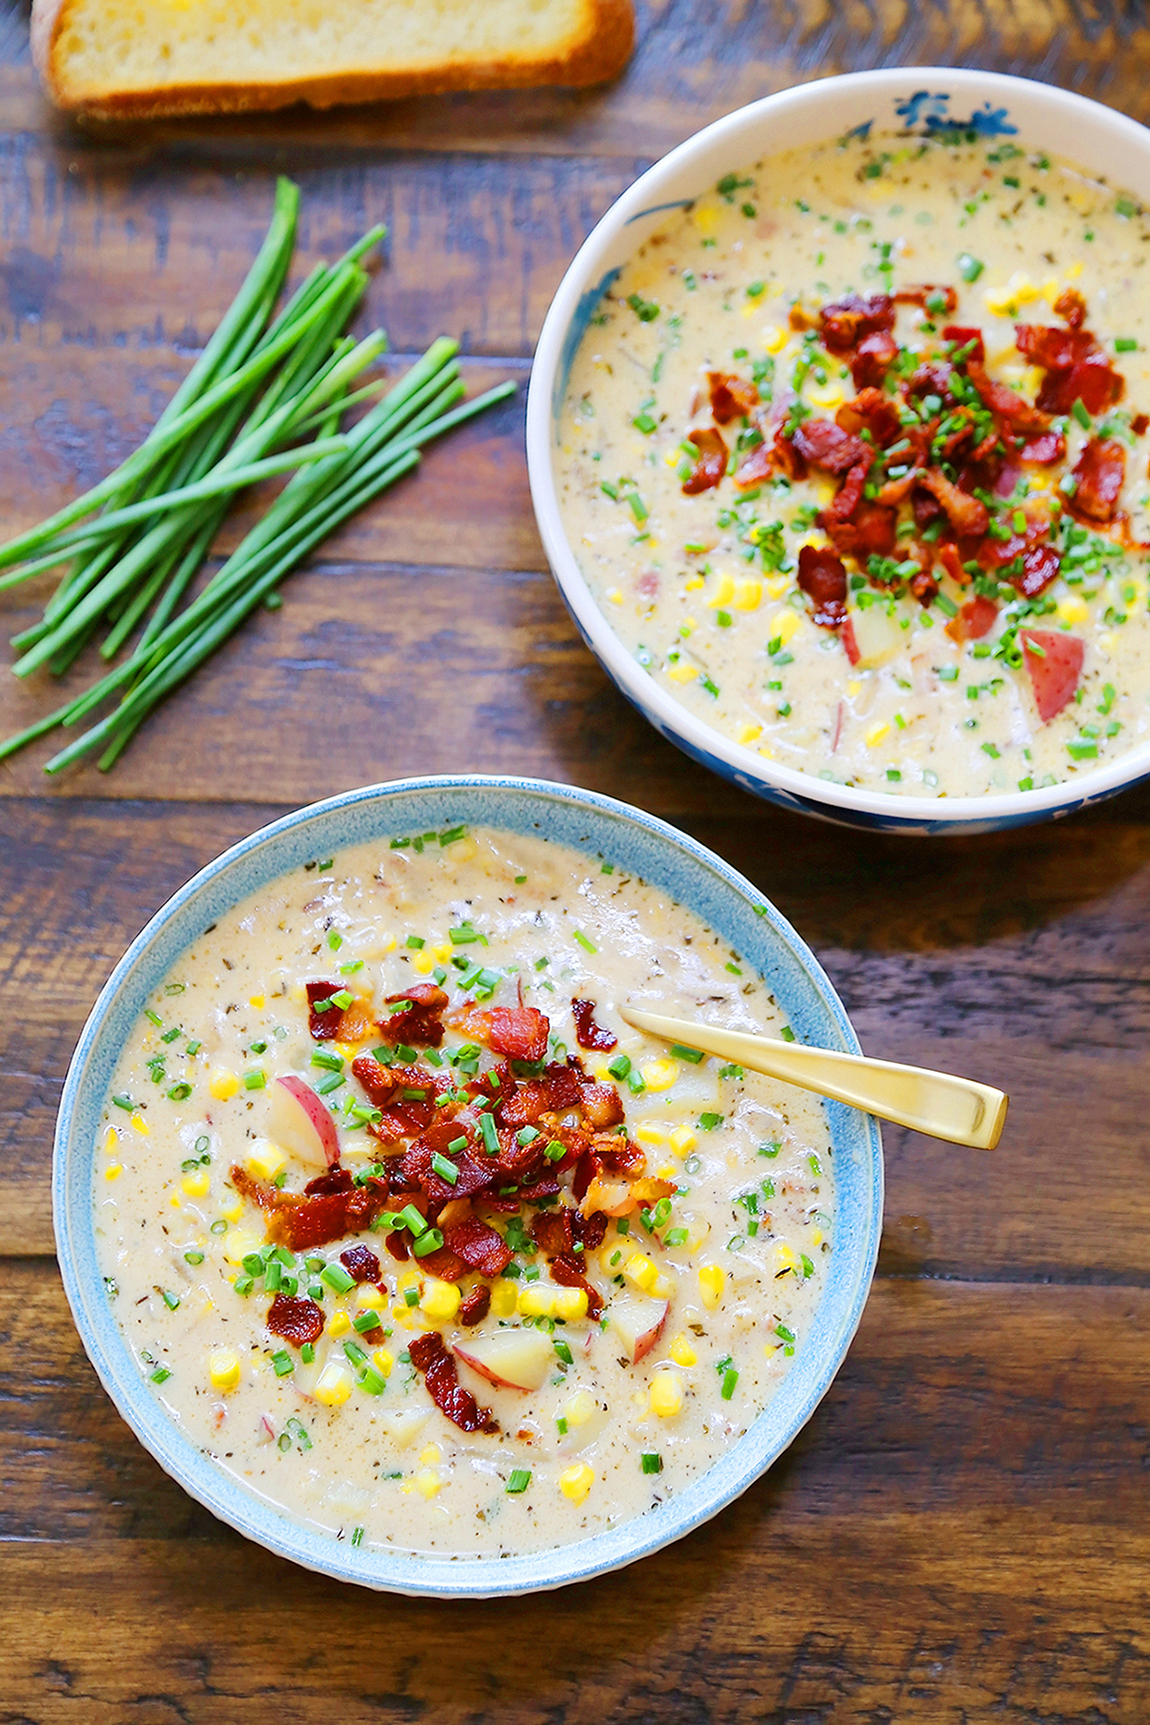 Creamy Corn Chowder with Bacon - Cozy, delicious 30-minute meal. Quick + easy in one pot! thecomfortofcooking.com